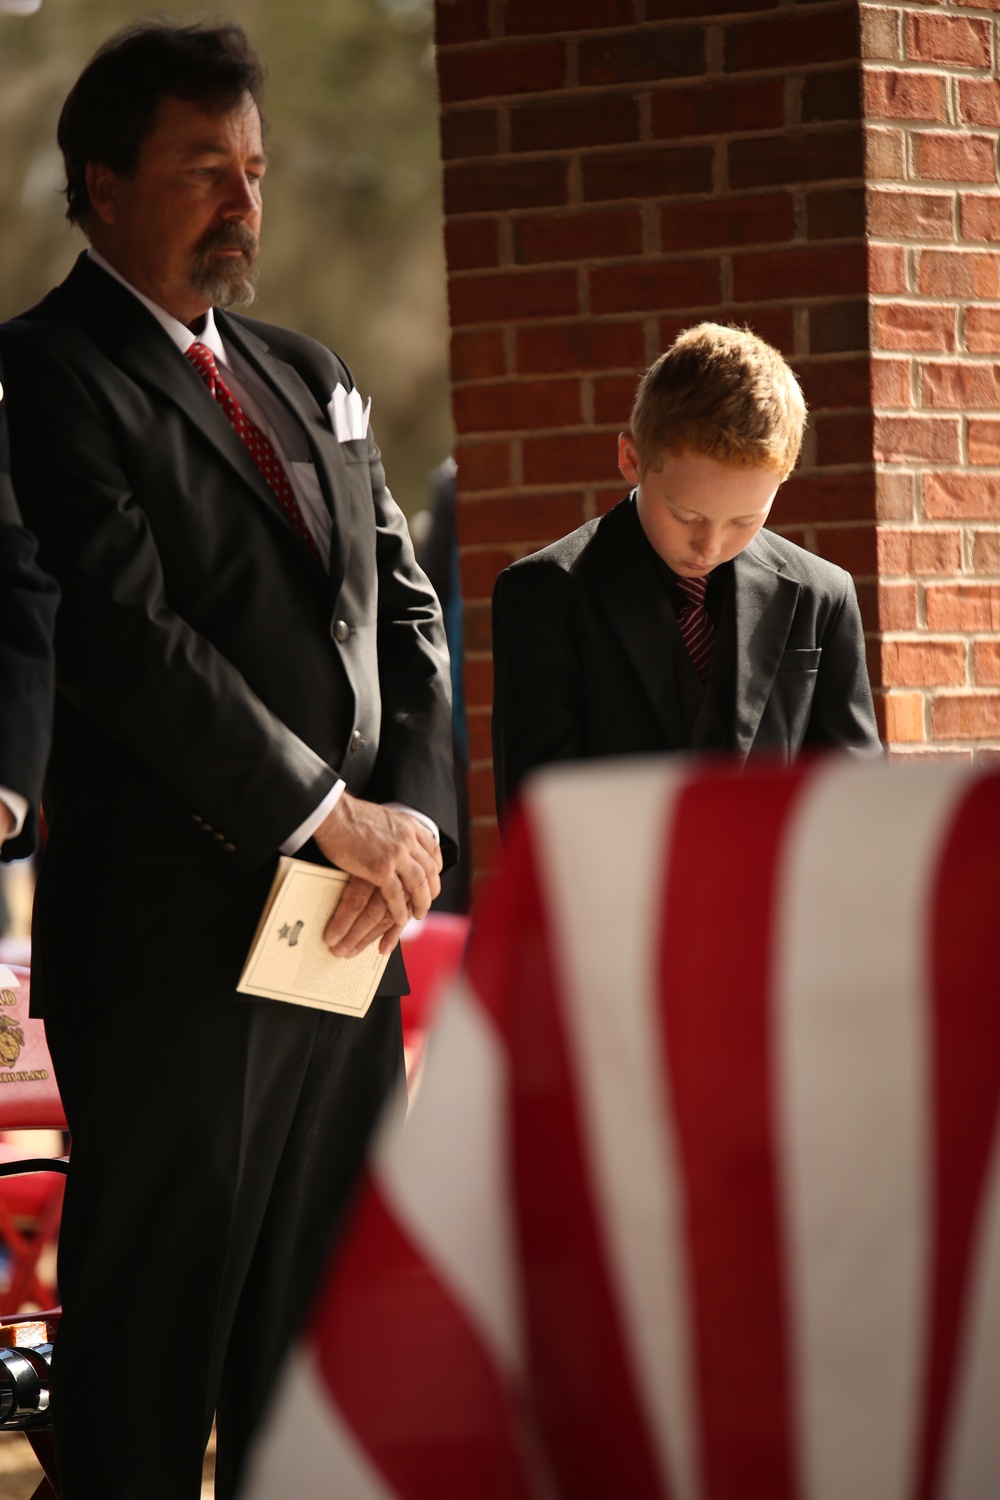 Photo Gallery: Marine Corps Medal of Honor recipient, Beaufort resident laid to rest at 73